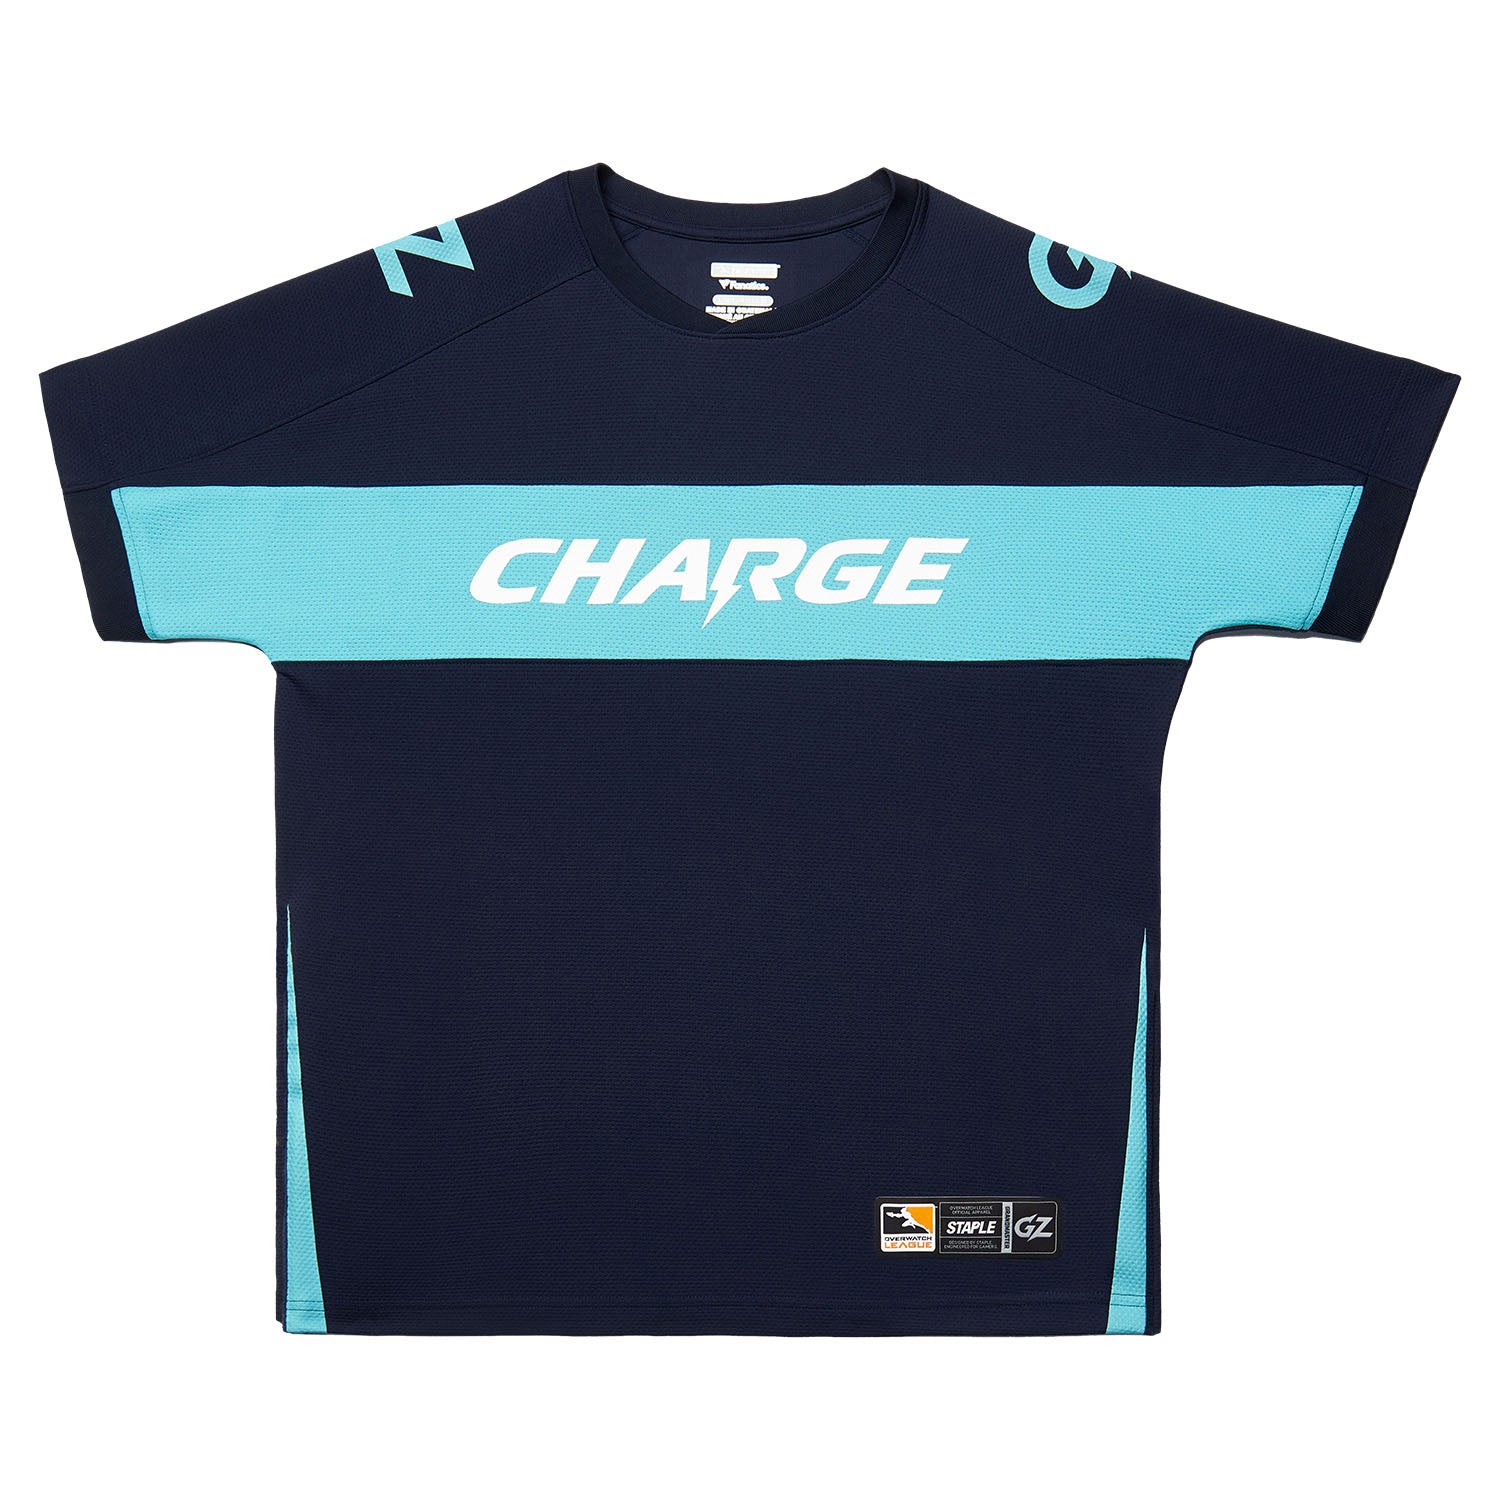 Guangzhou Charge Blue Jersey - Front View